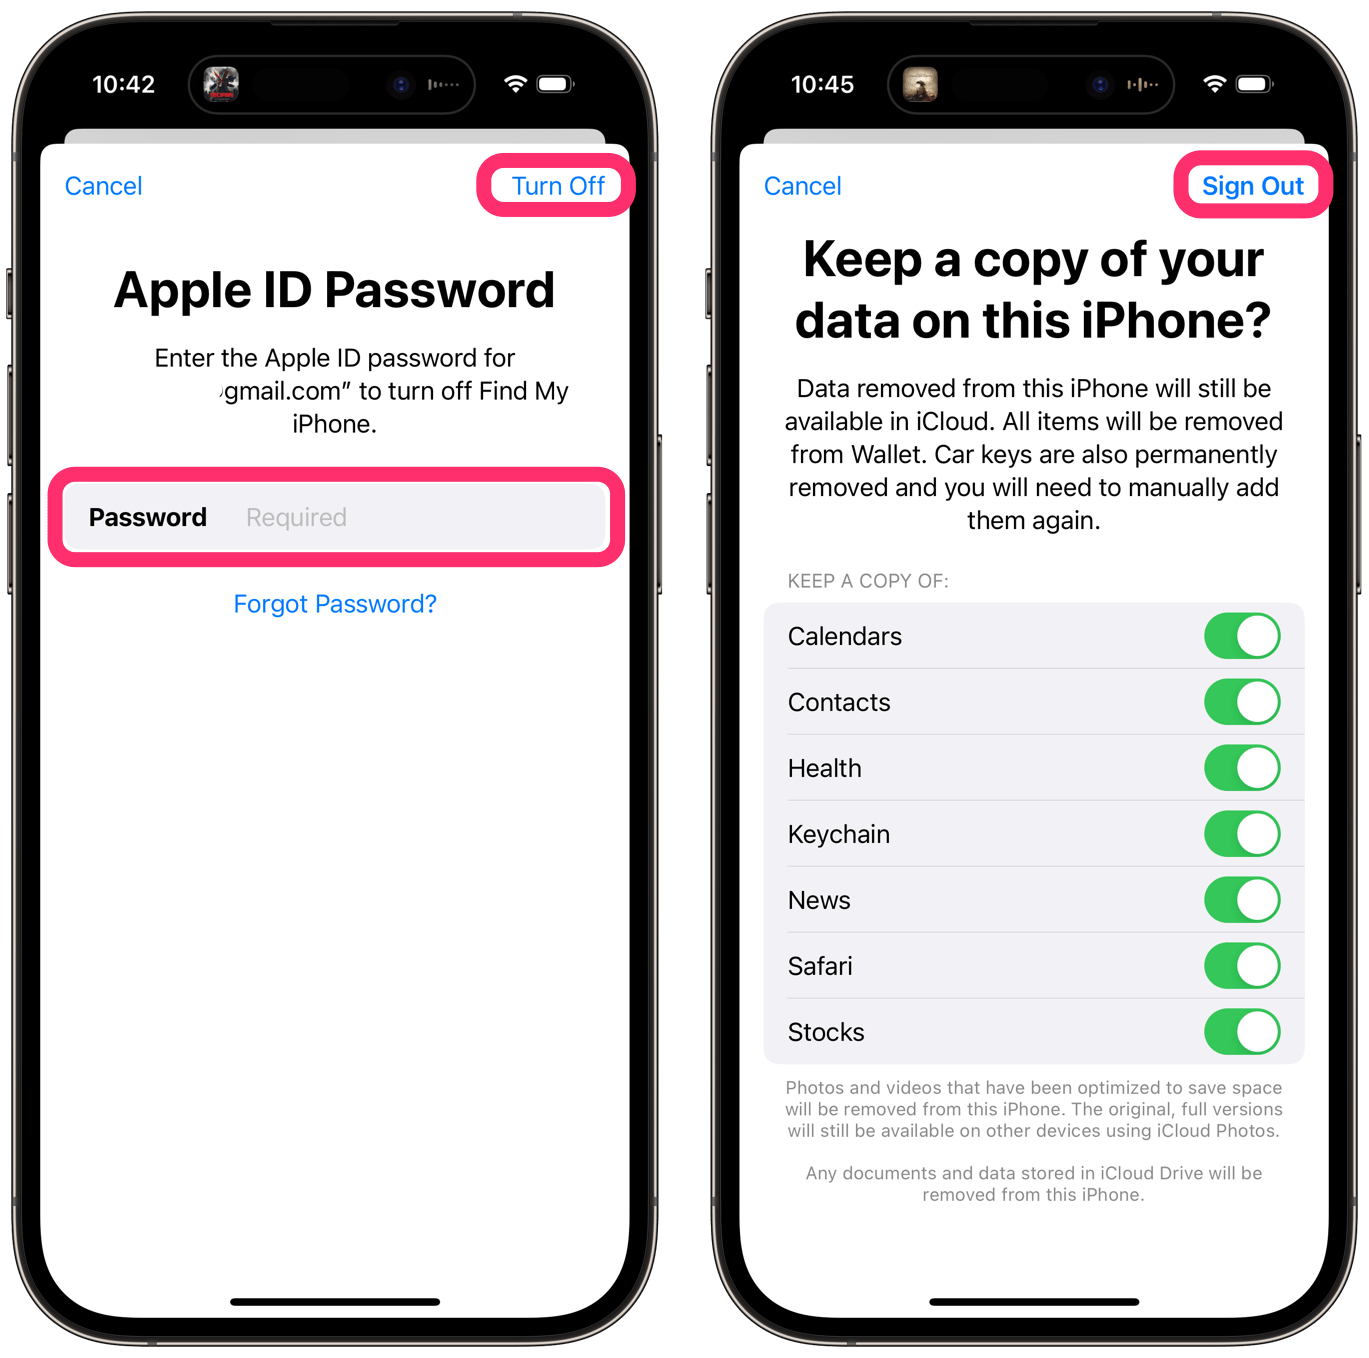 turn off find my iPhone to sign out of iCloud on iPhone